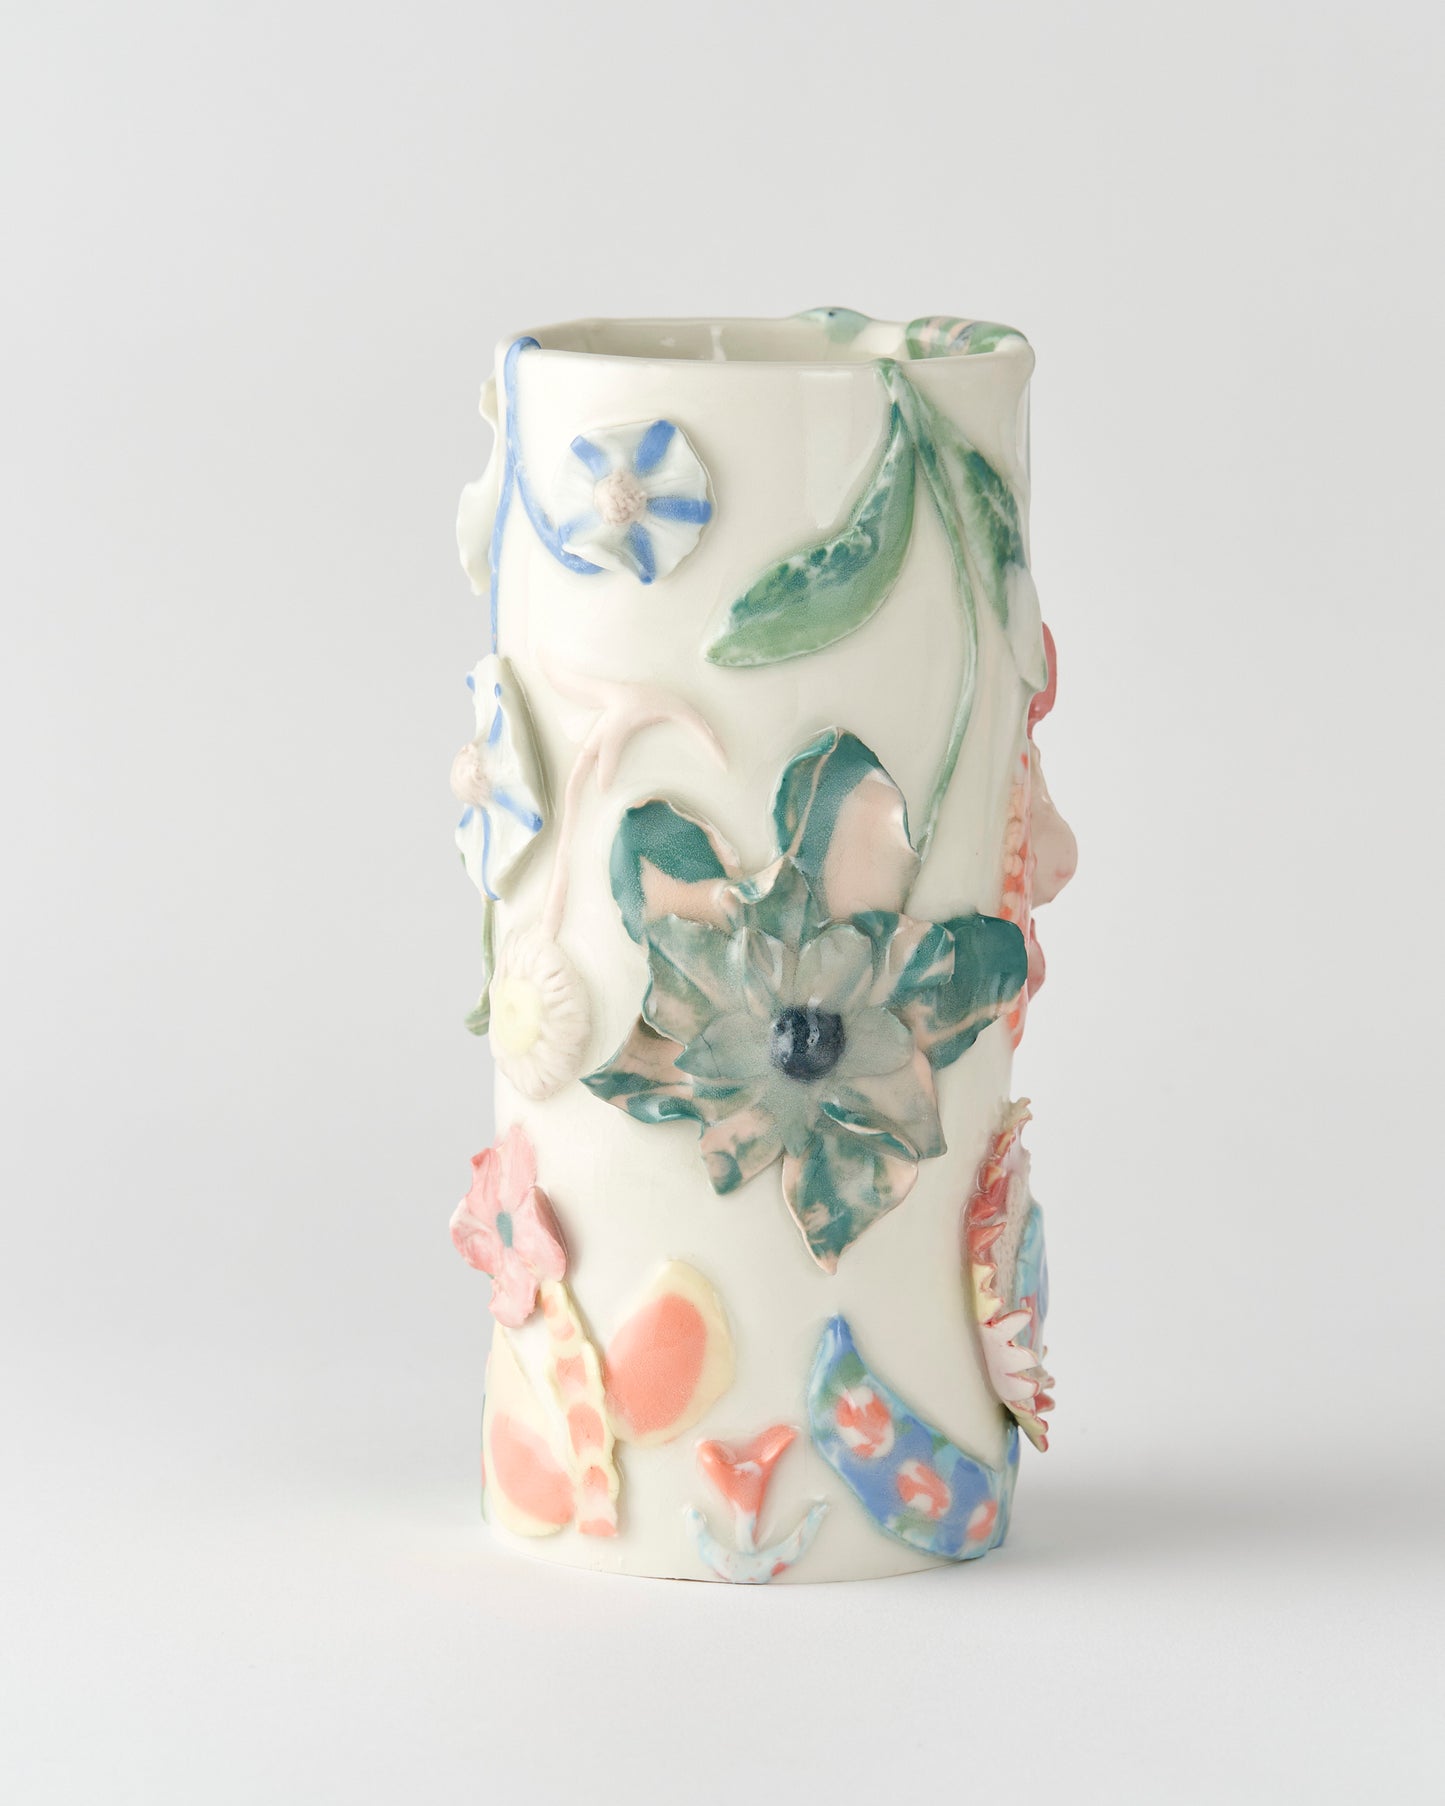 Marie Priour / Forget me not / Vase